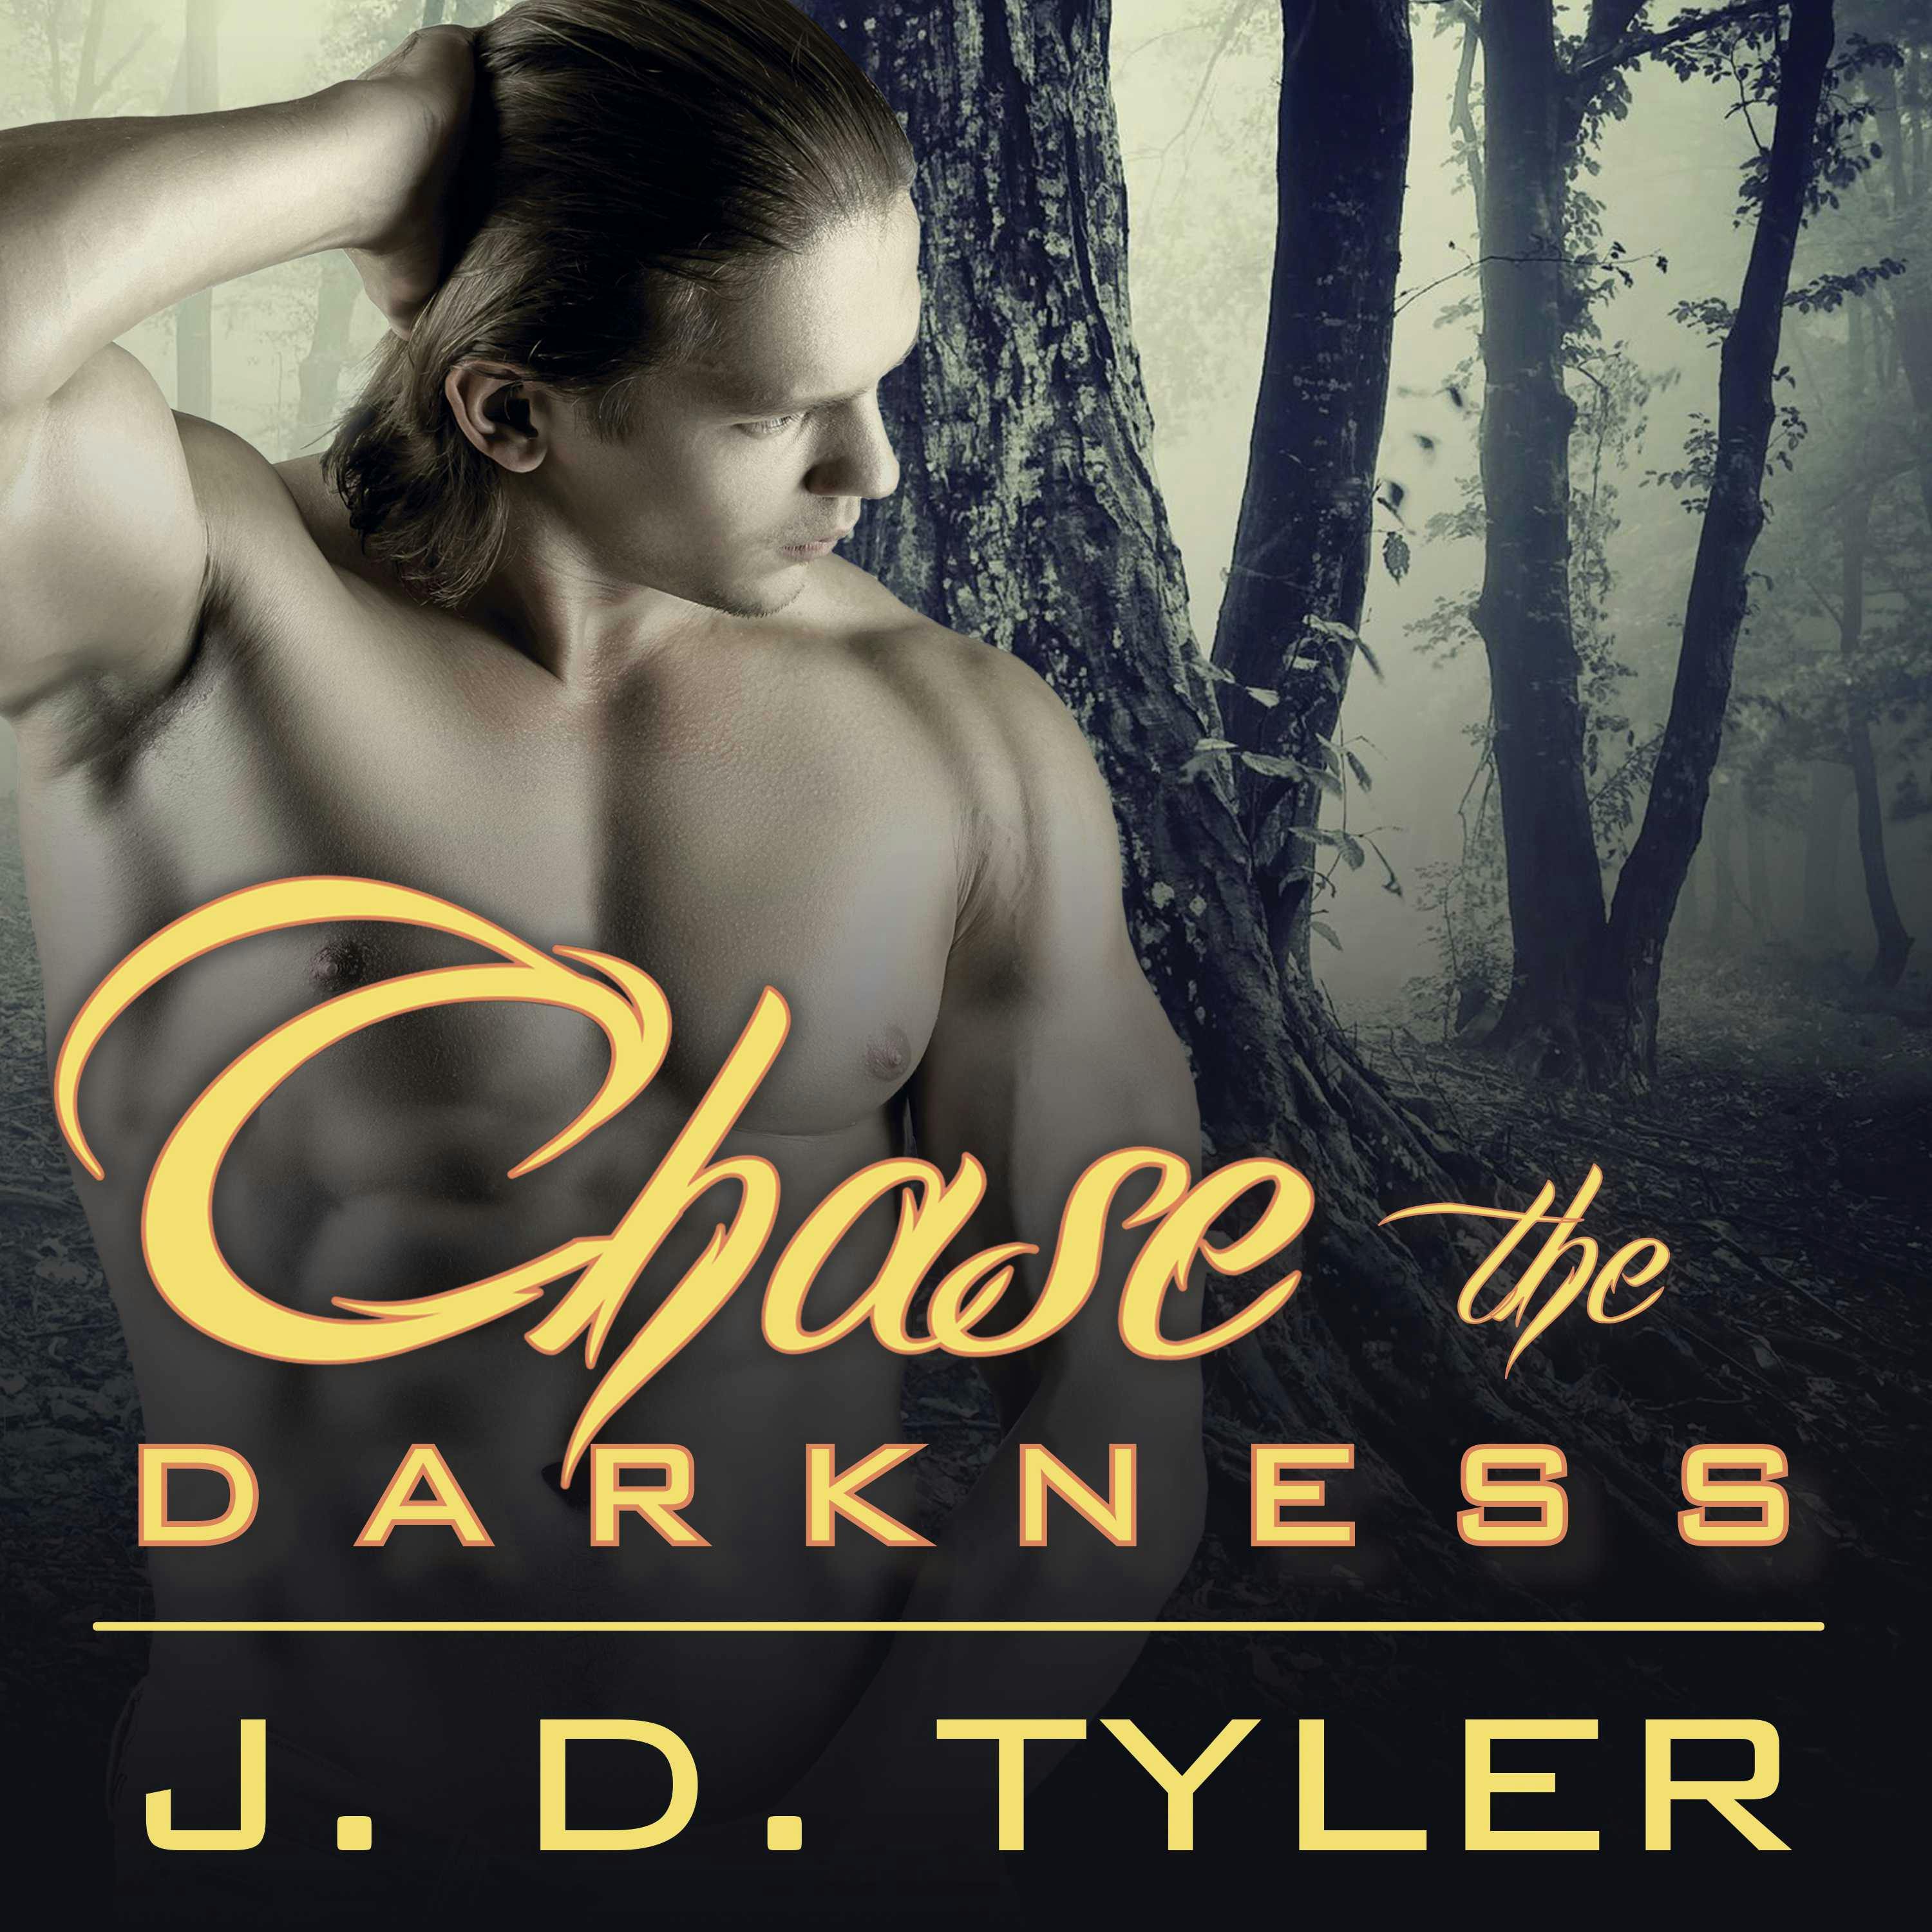 Chase the Darkness - J. D. Tyler